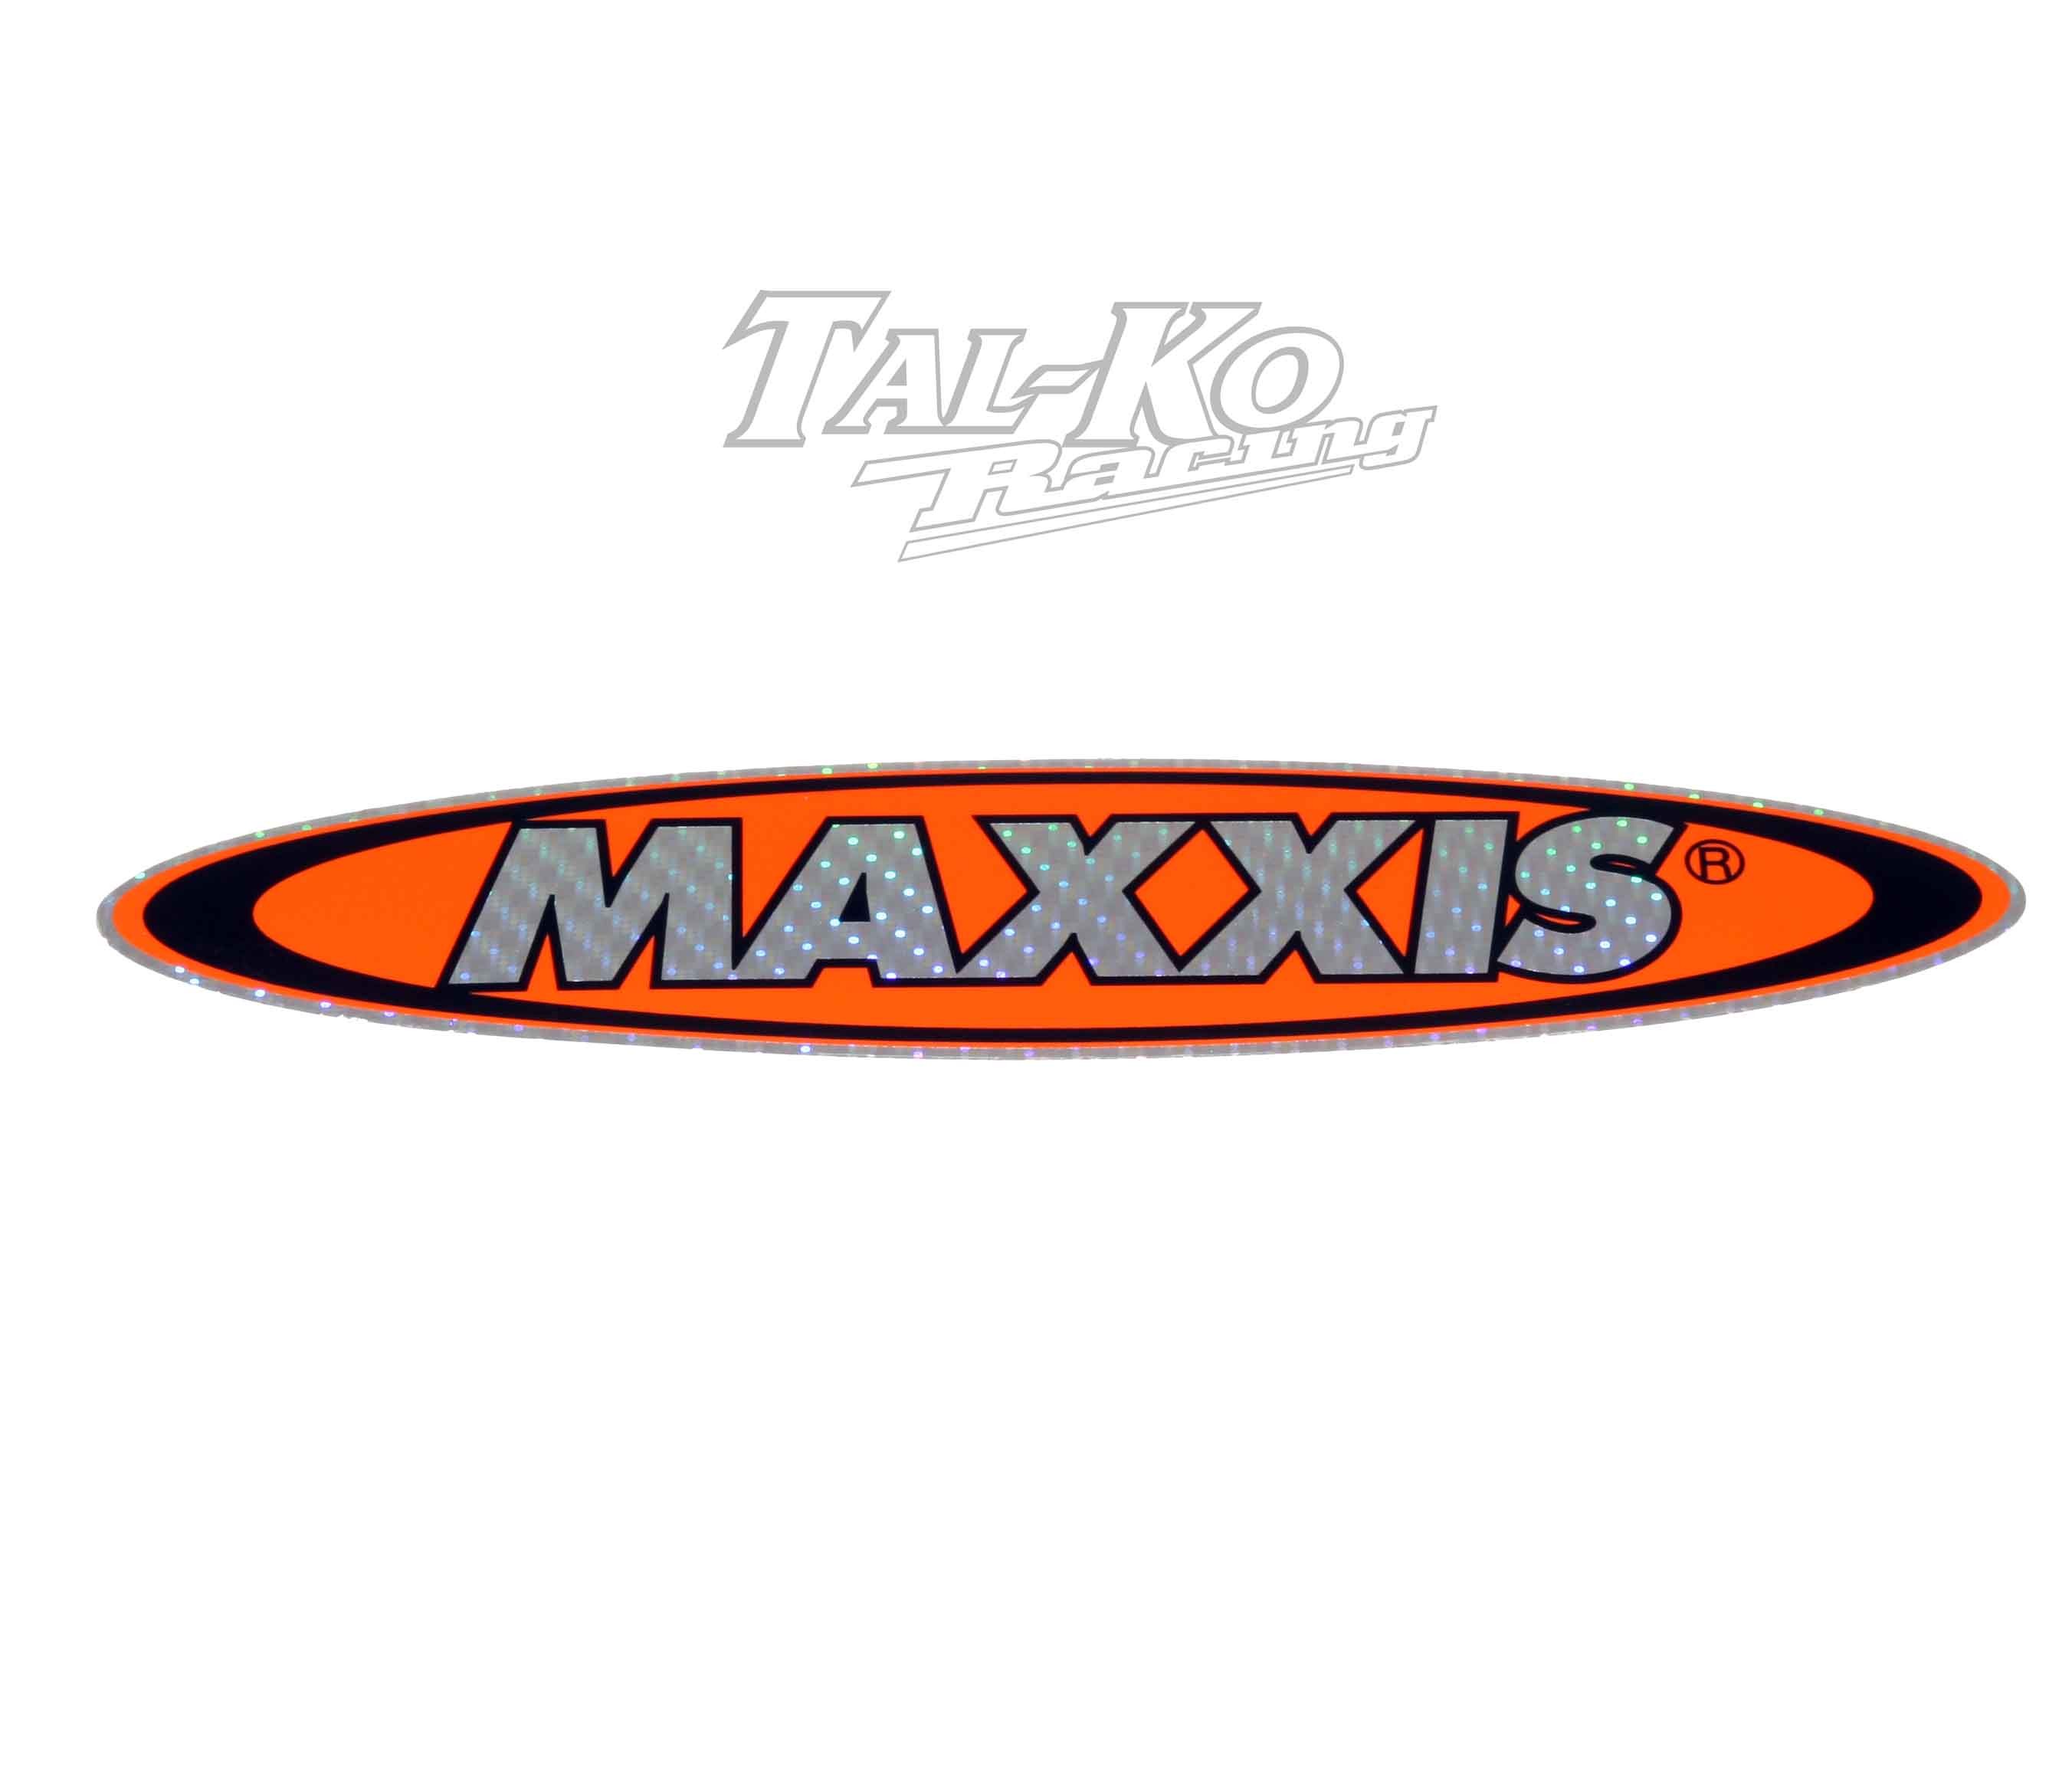 MAXXIS TYRE STICKER DECAL 200 x 40  SPARKLE 